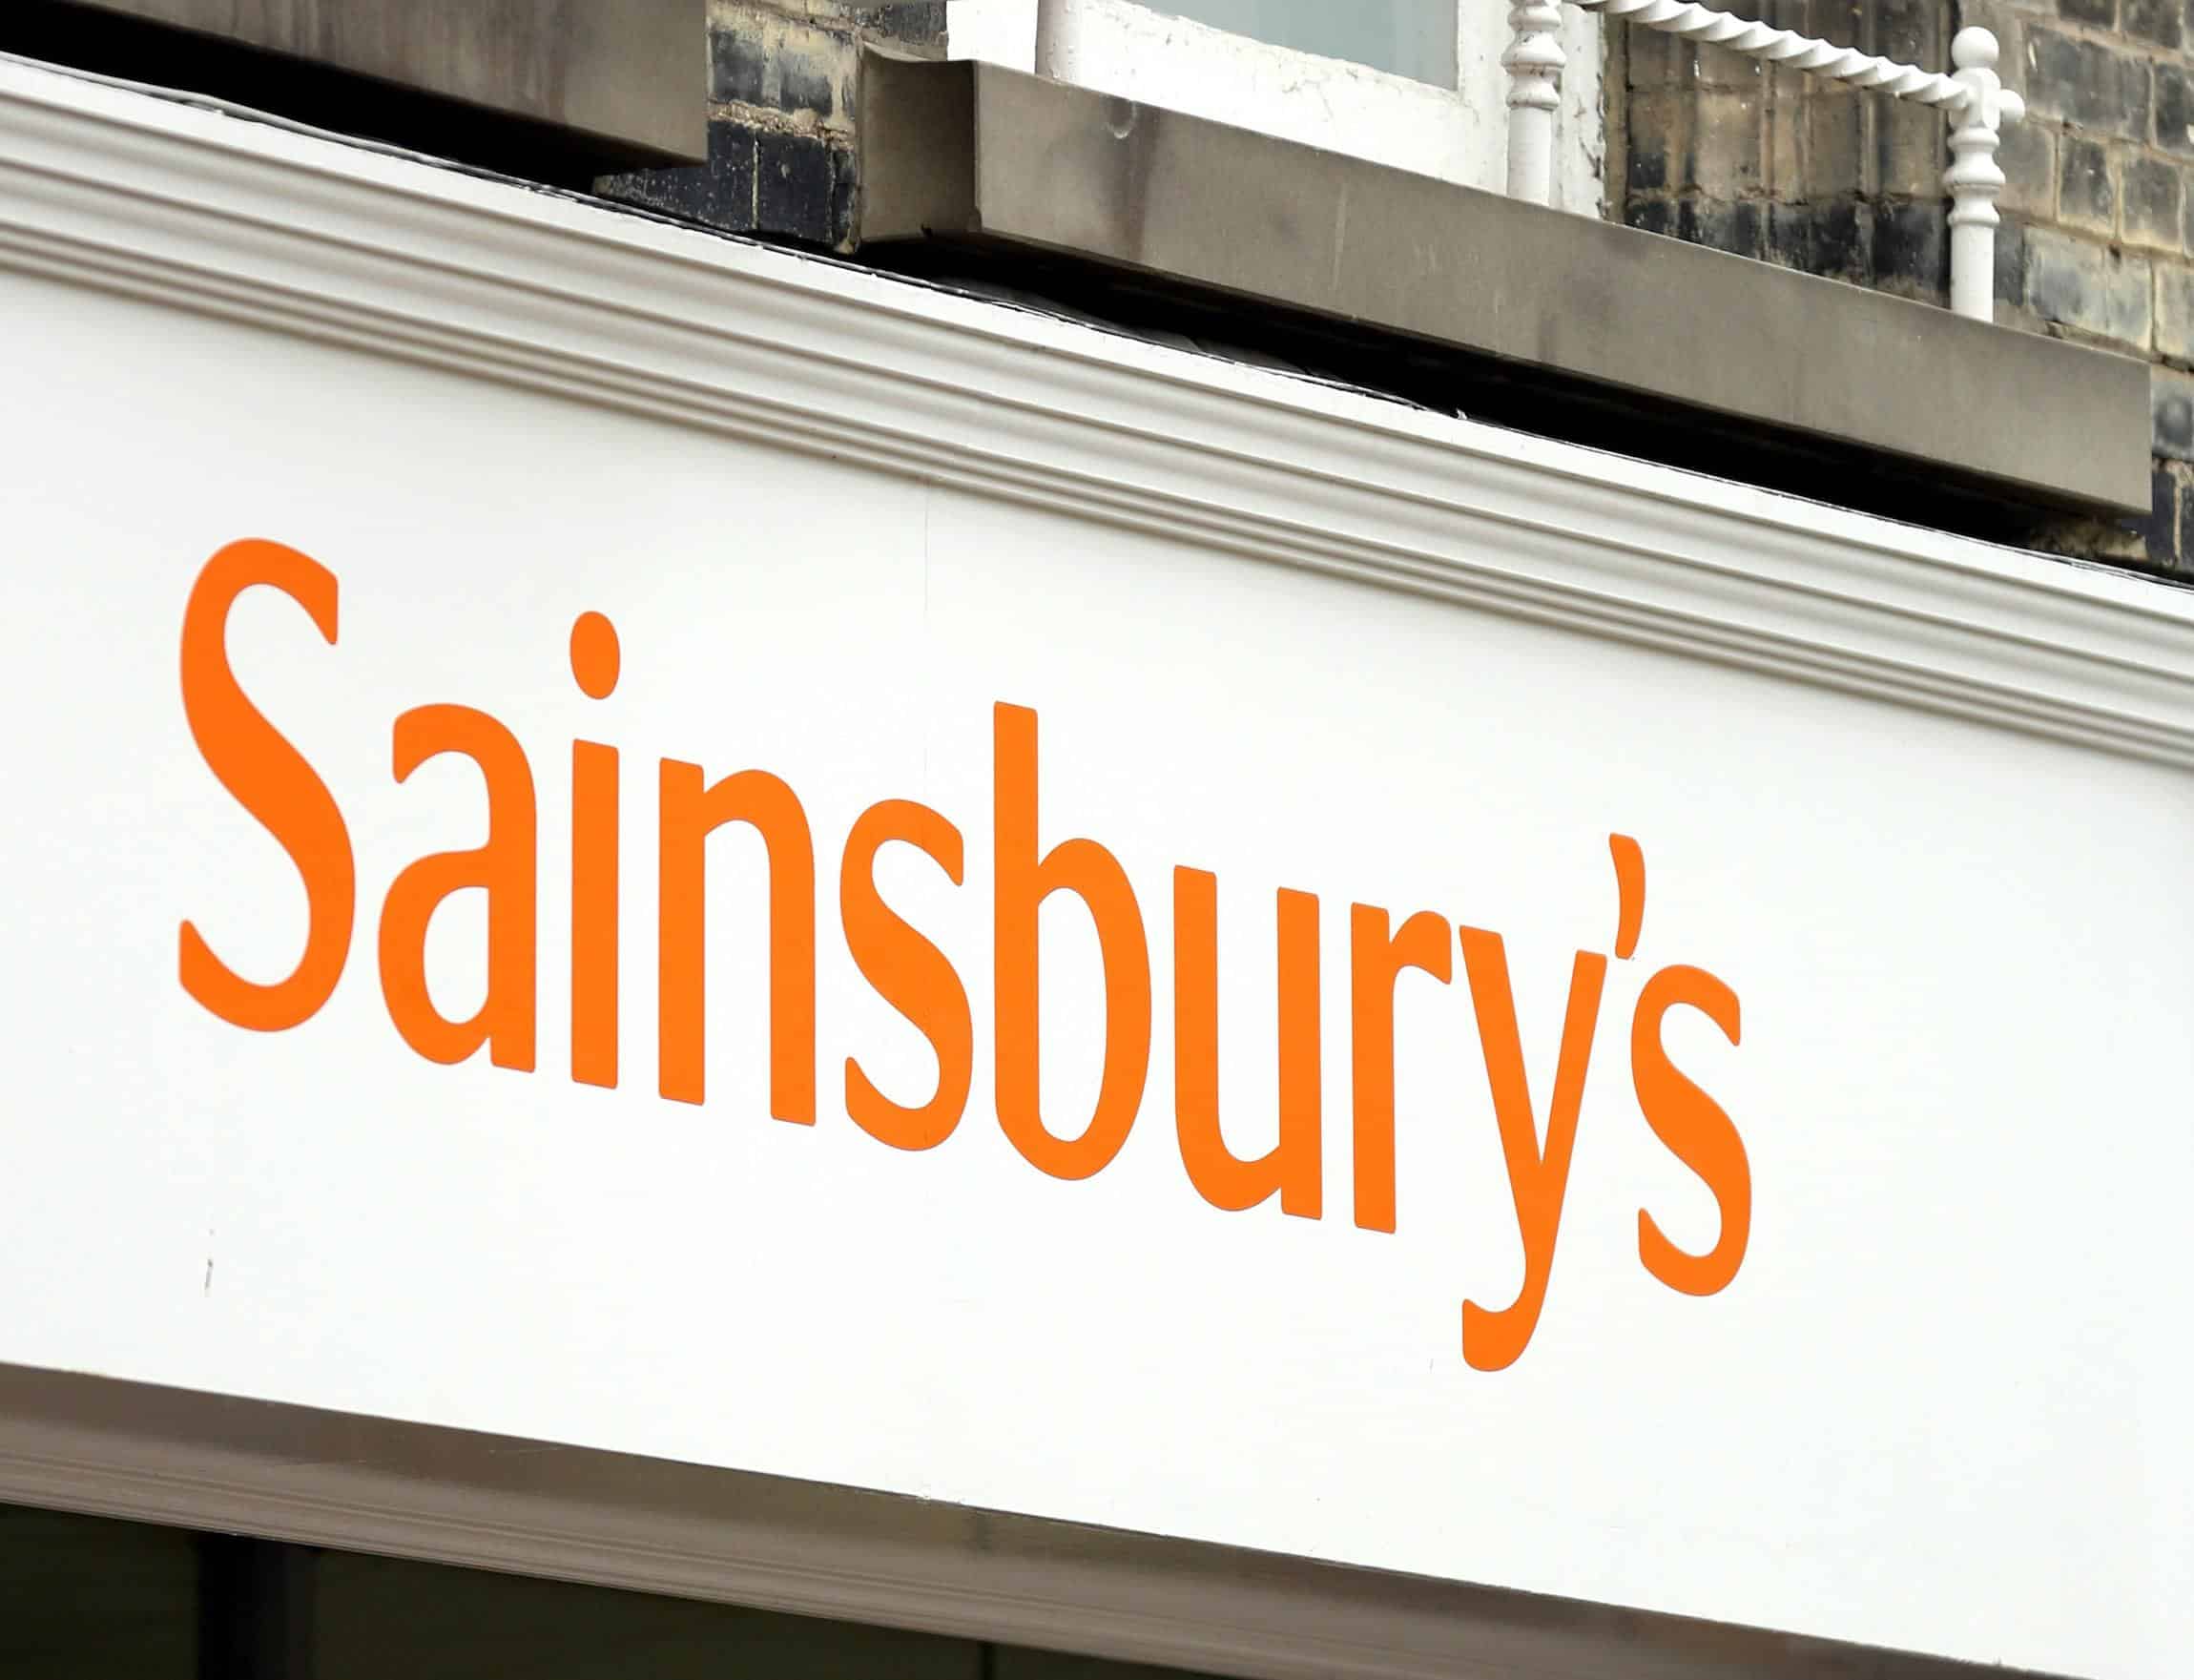 Reactions as calls to boycott Sainsbury’s over black people in advert…when Aldi features family of carrots